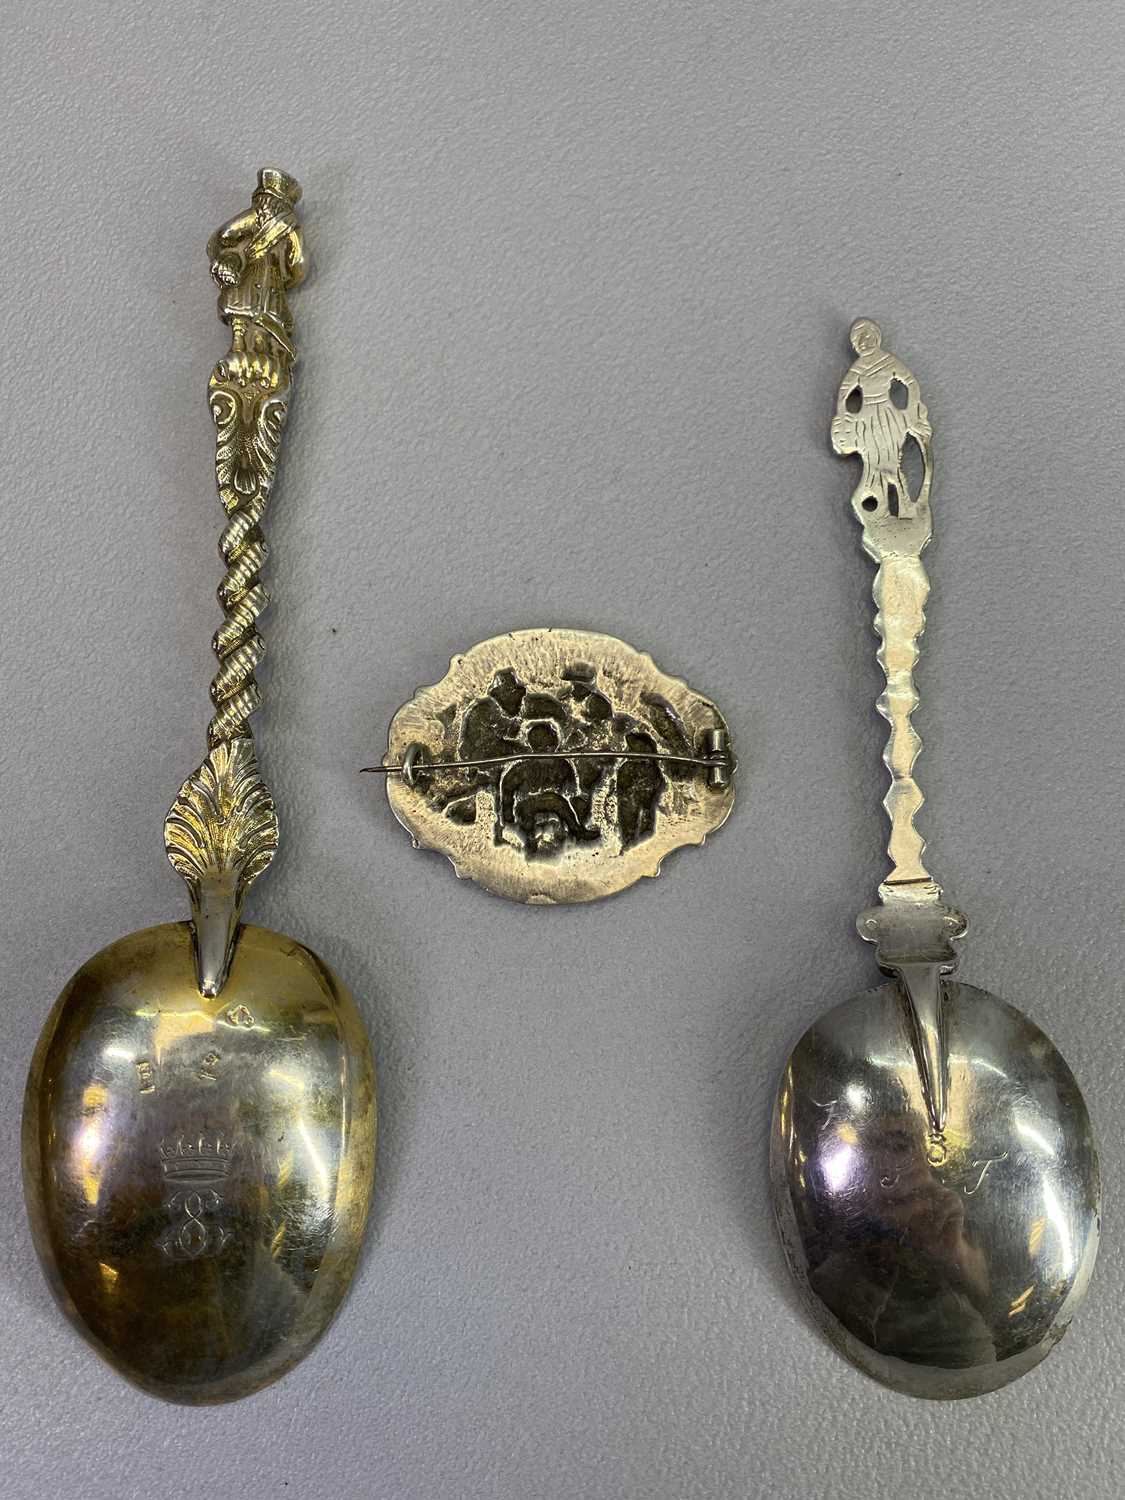 LATE 18TH/EARLY 19TH CENTURY ORNATE DUTCH SILVER SPOONS (2) and an untested white metal, possibly - Image 3 of 4